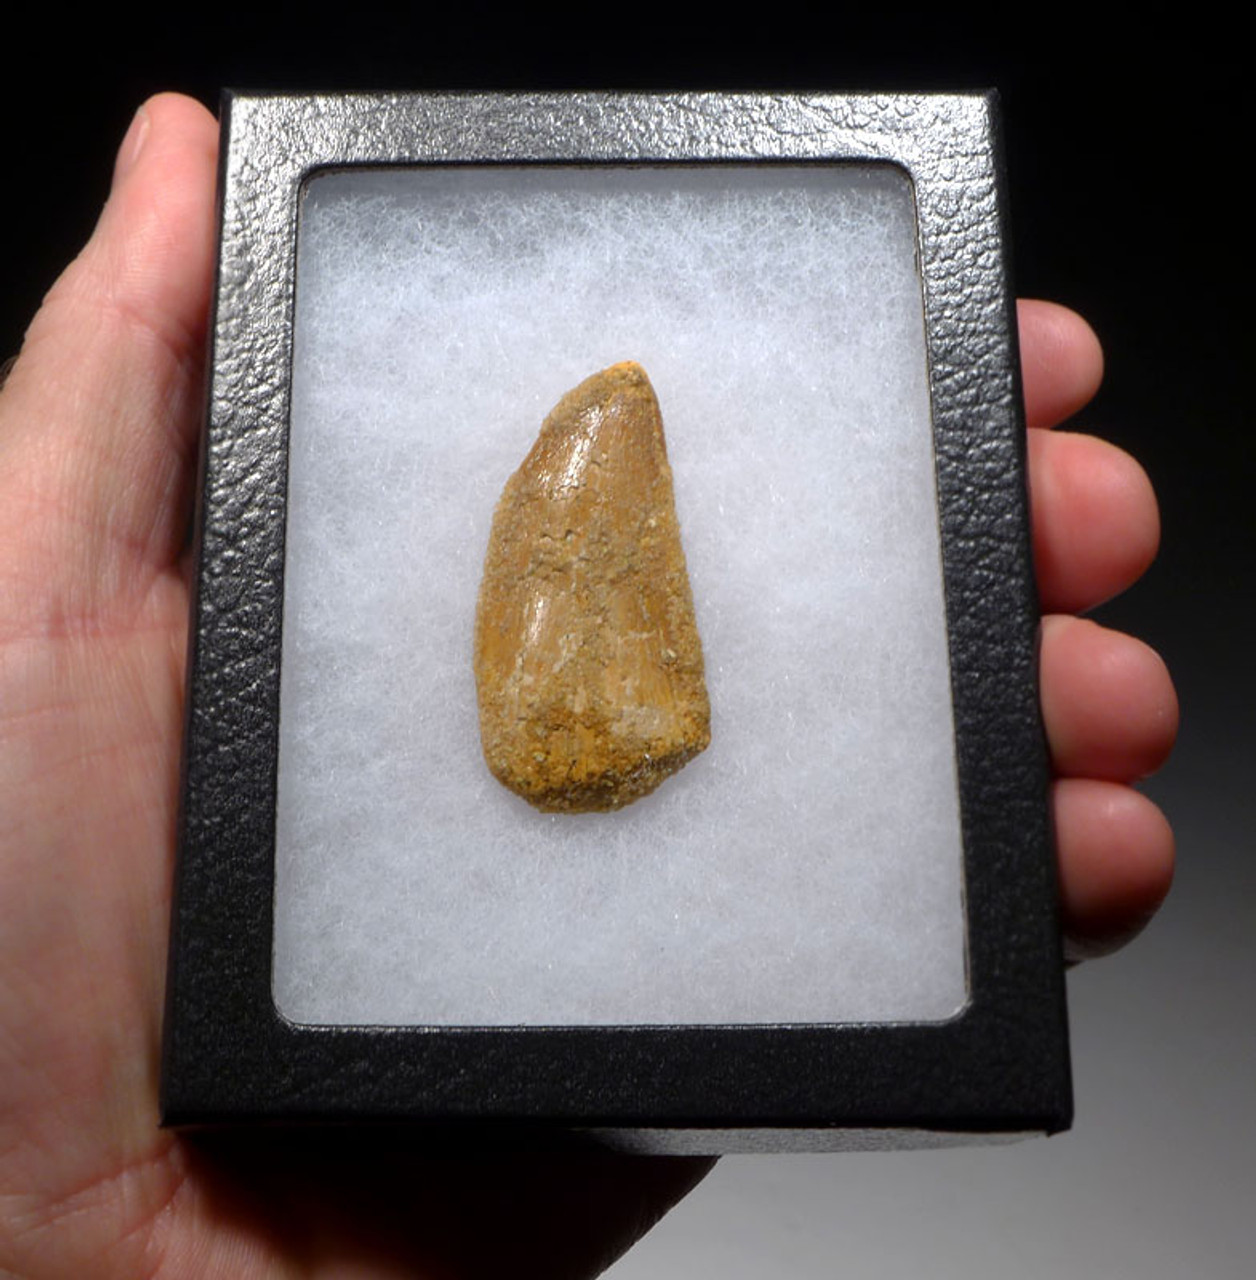 DT2-096 - CARCHARODONTOSAURUS FOSSIL TOOTH FROM THE LARGEST MEAT-EATING DINOSAUR 